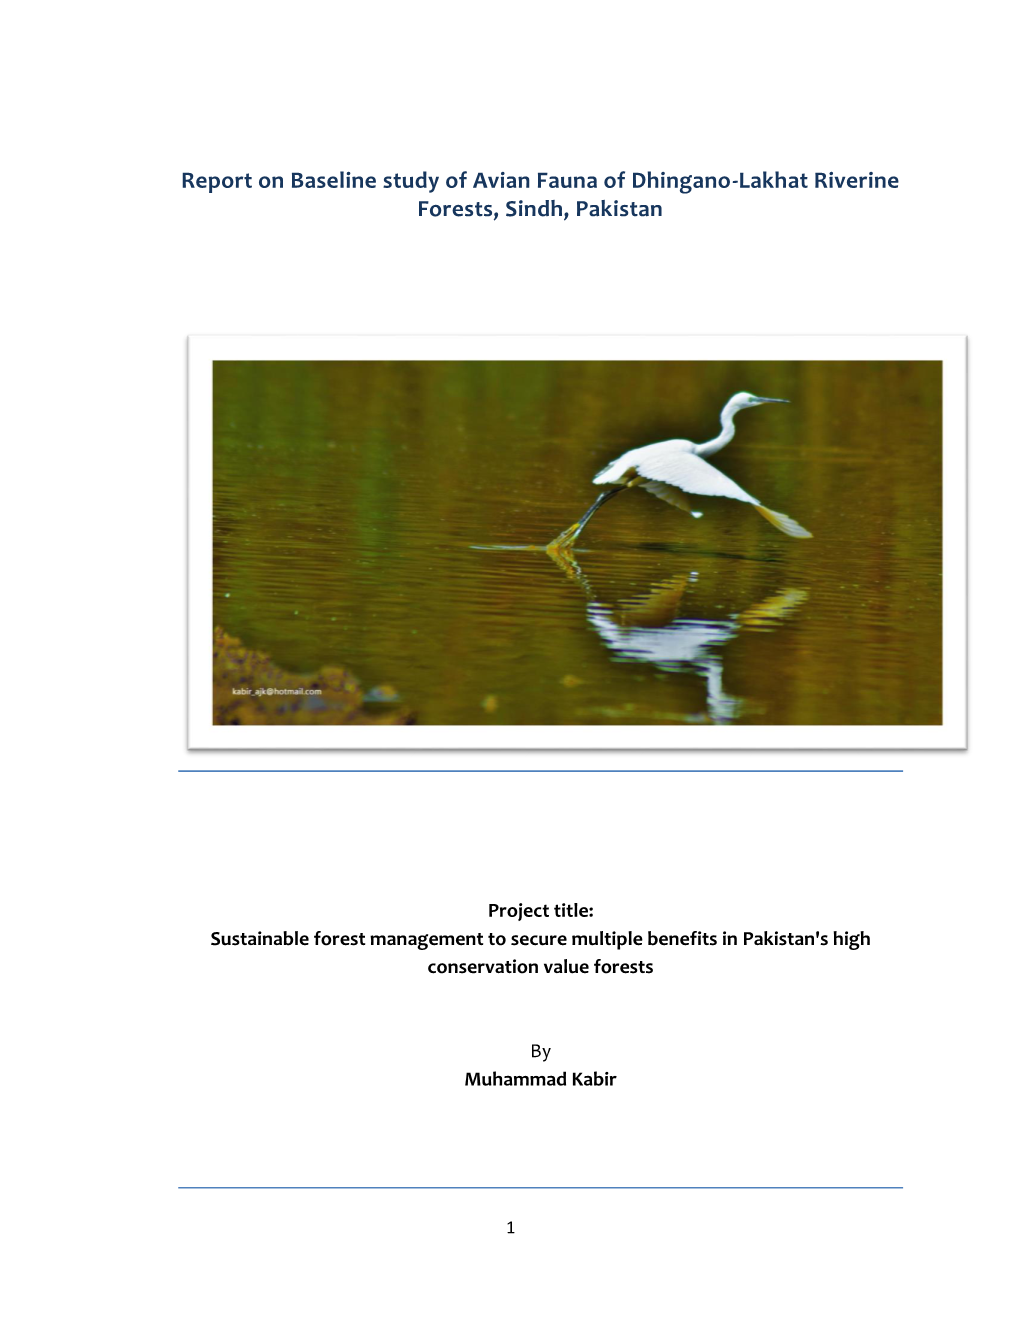 Report on Baseline Study of Avian Fauna of Dhingano-Lakhat Riverine Forests, Sindh, Pakistan